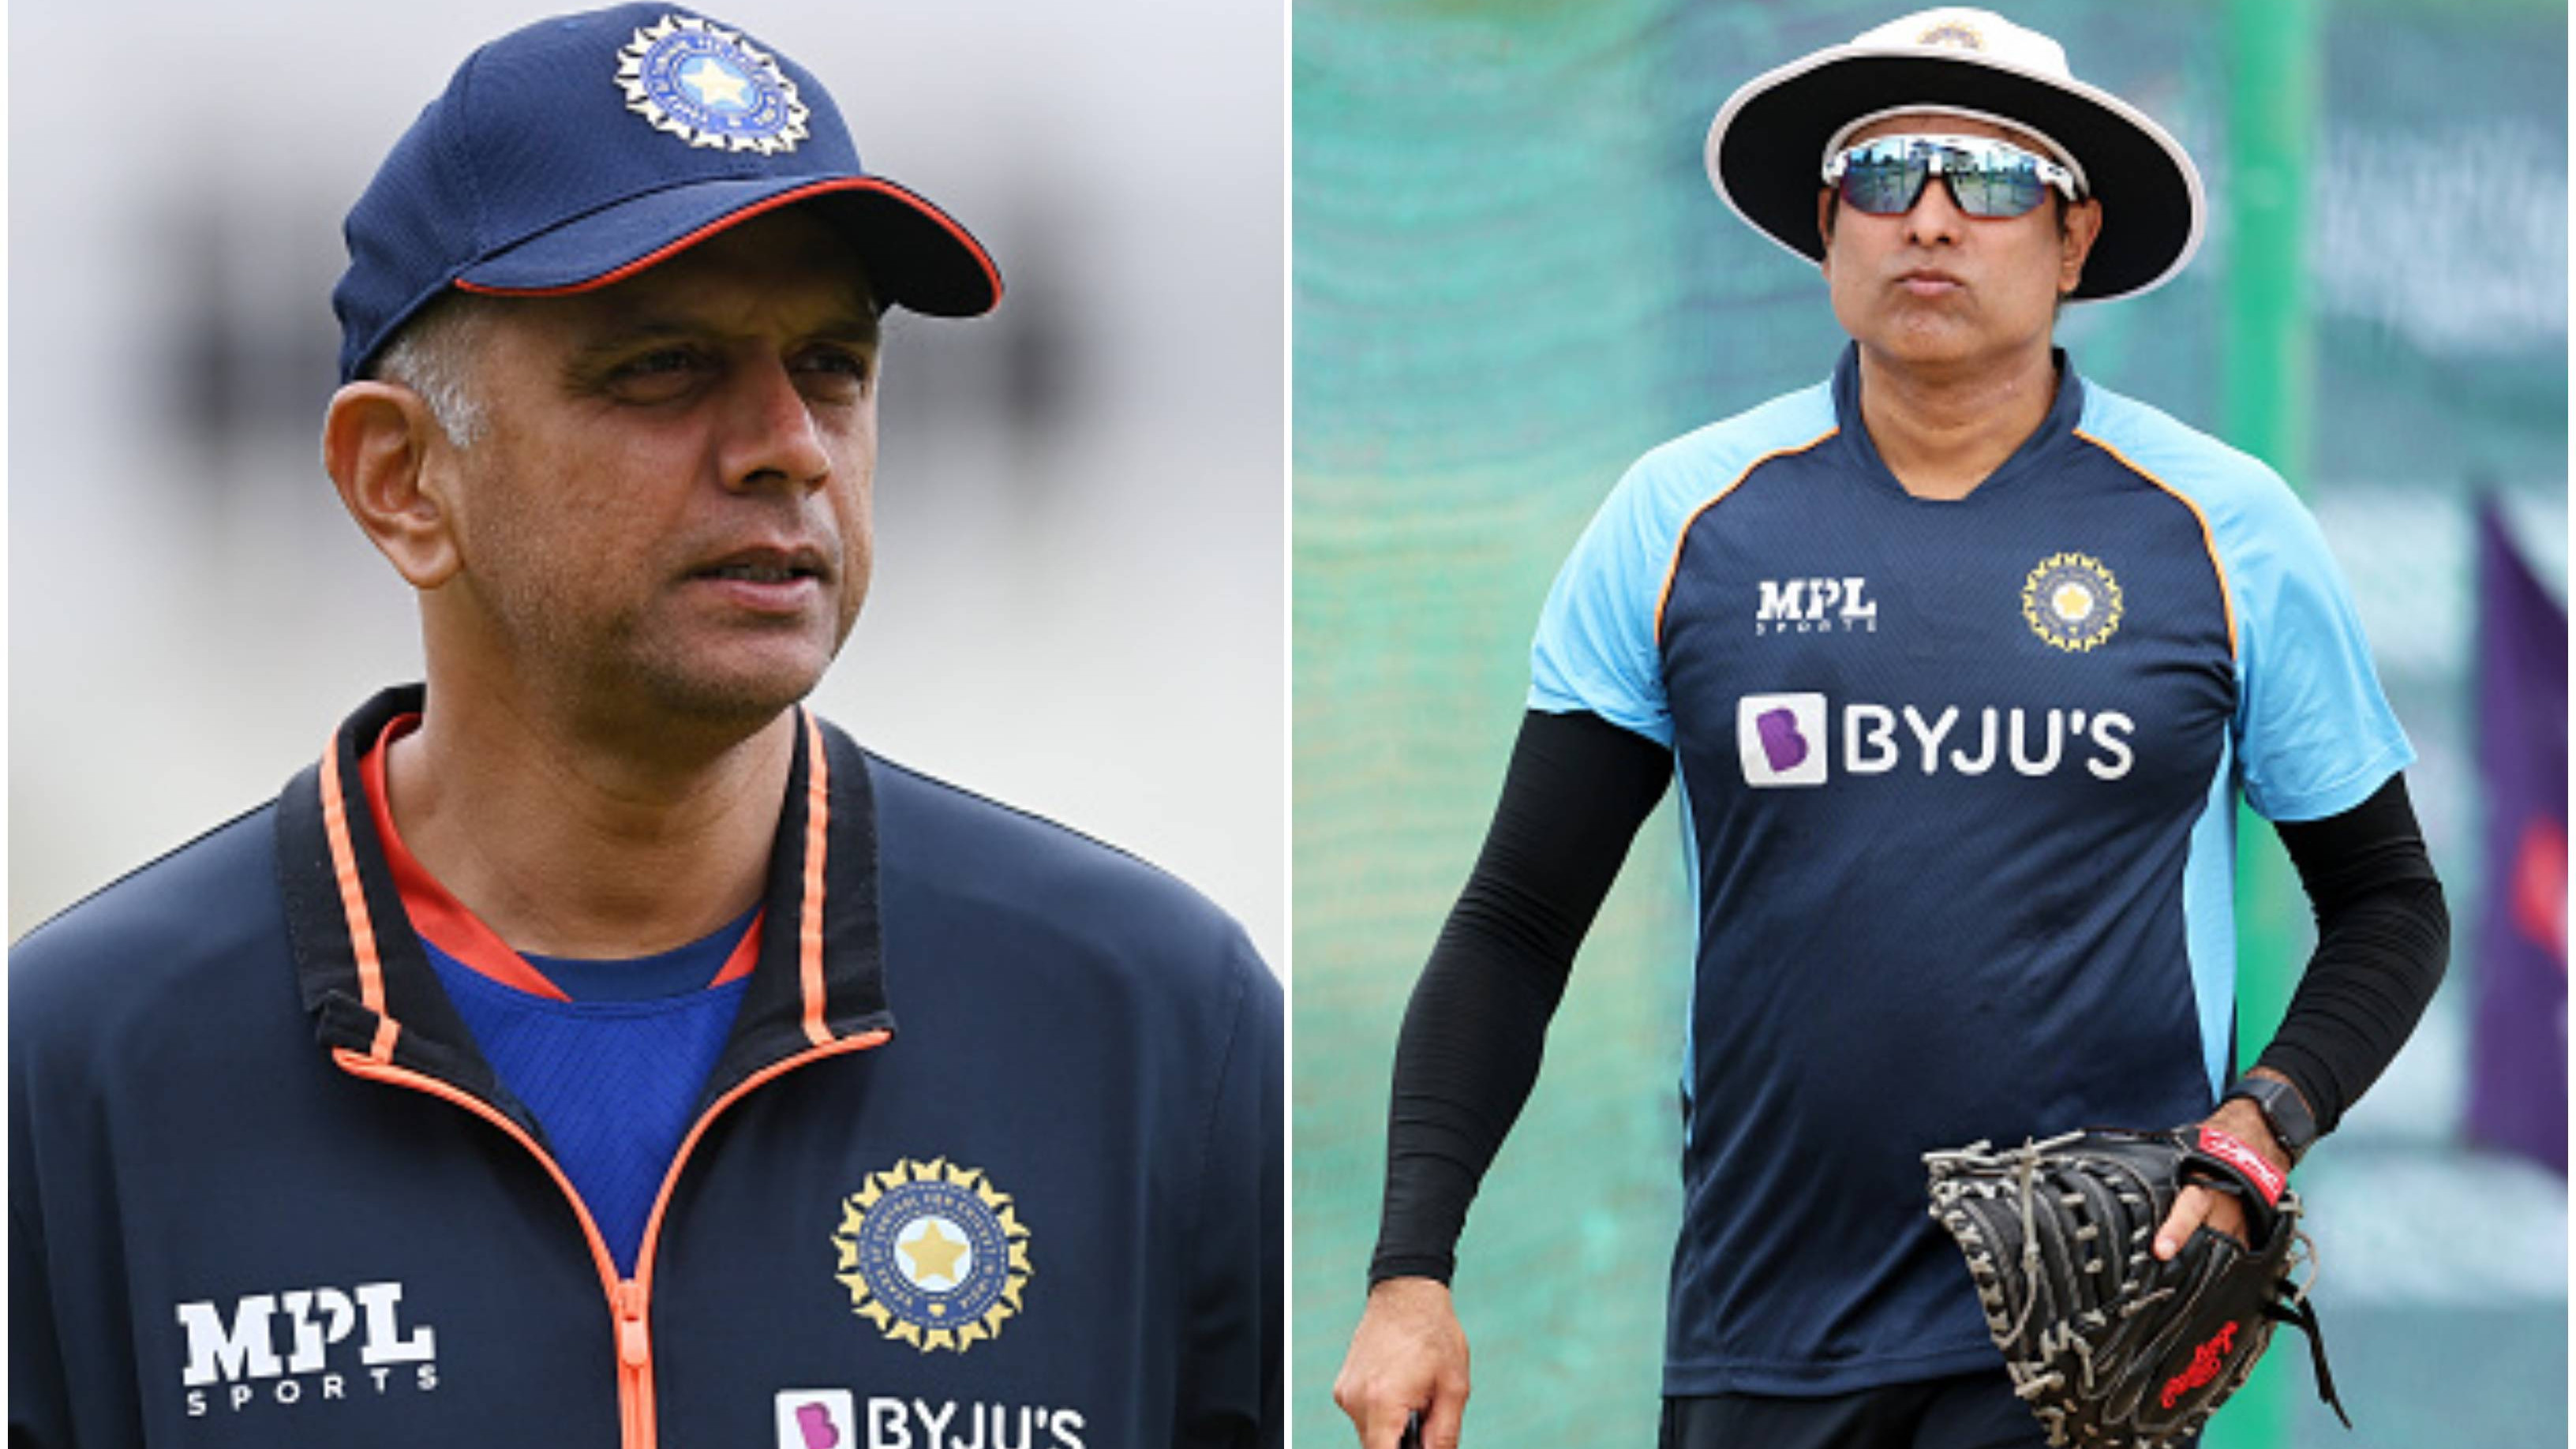 NZ v IND 2022: Rahul Dravid rested, VVS Laxman to coach Team India on the white-ball tour of New Zealand